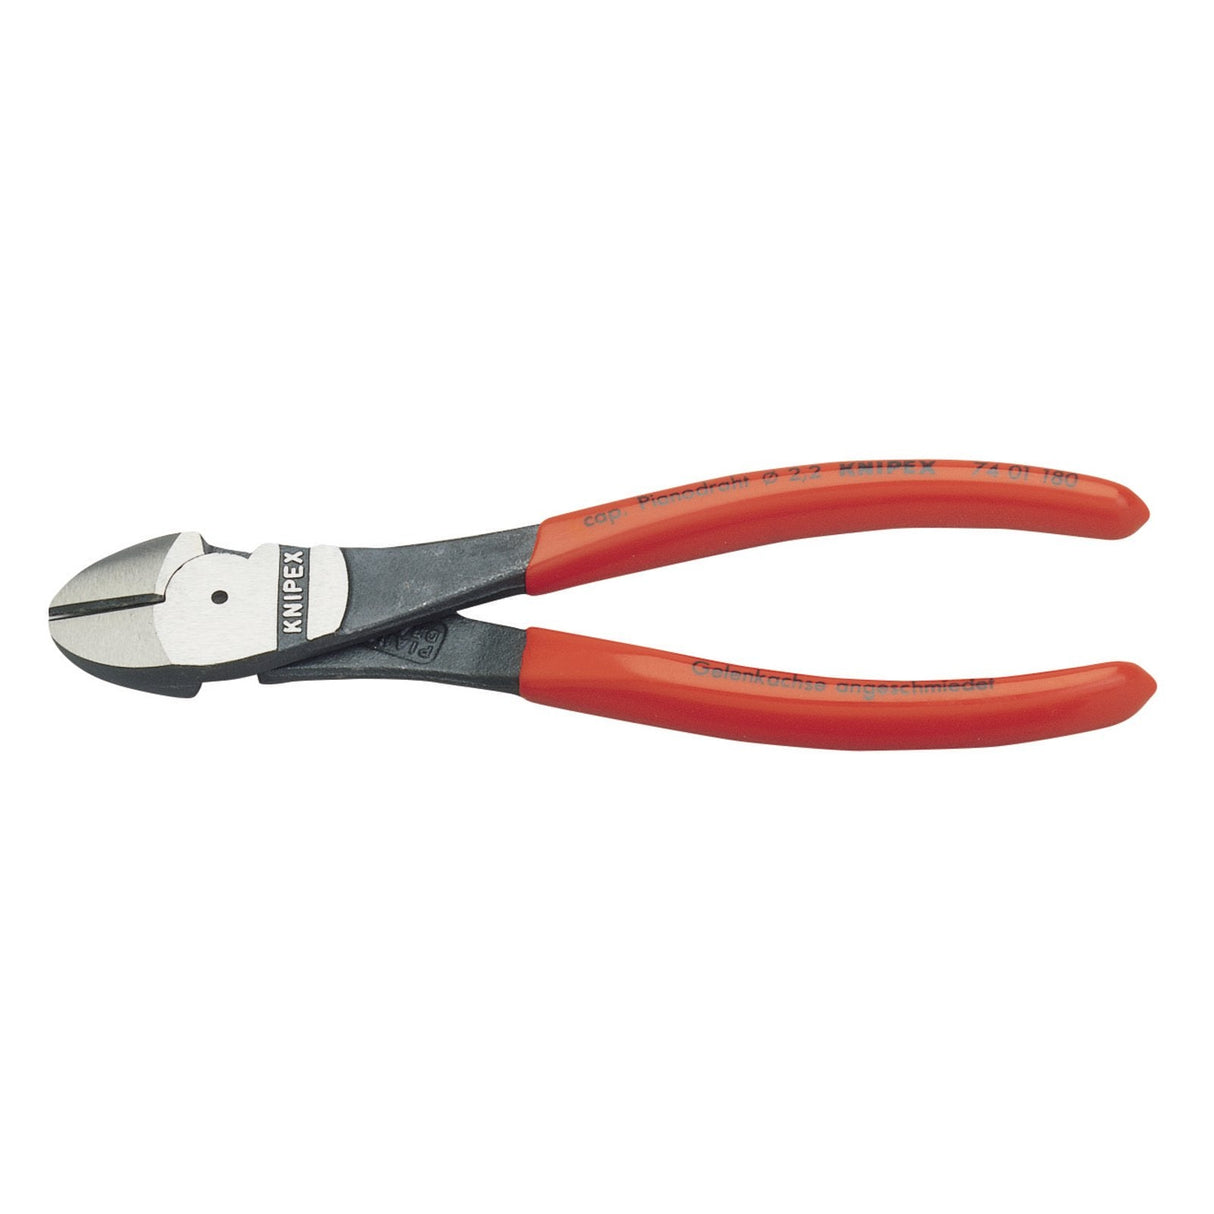 Draper Knipex 74 01 180 Sbe High Leverage Diagonal Side Cutter, 180mm - 74 01 180 SBE - Farming Parts